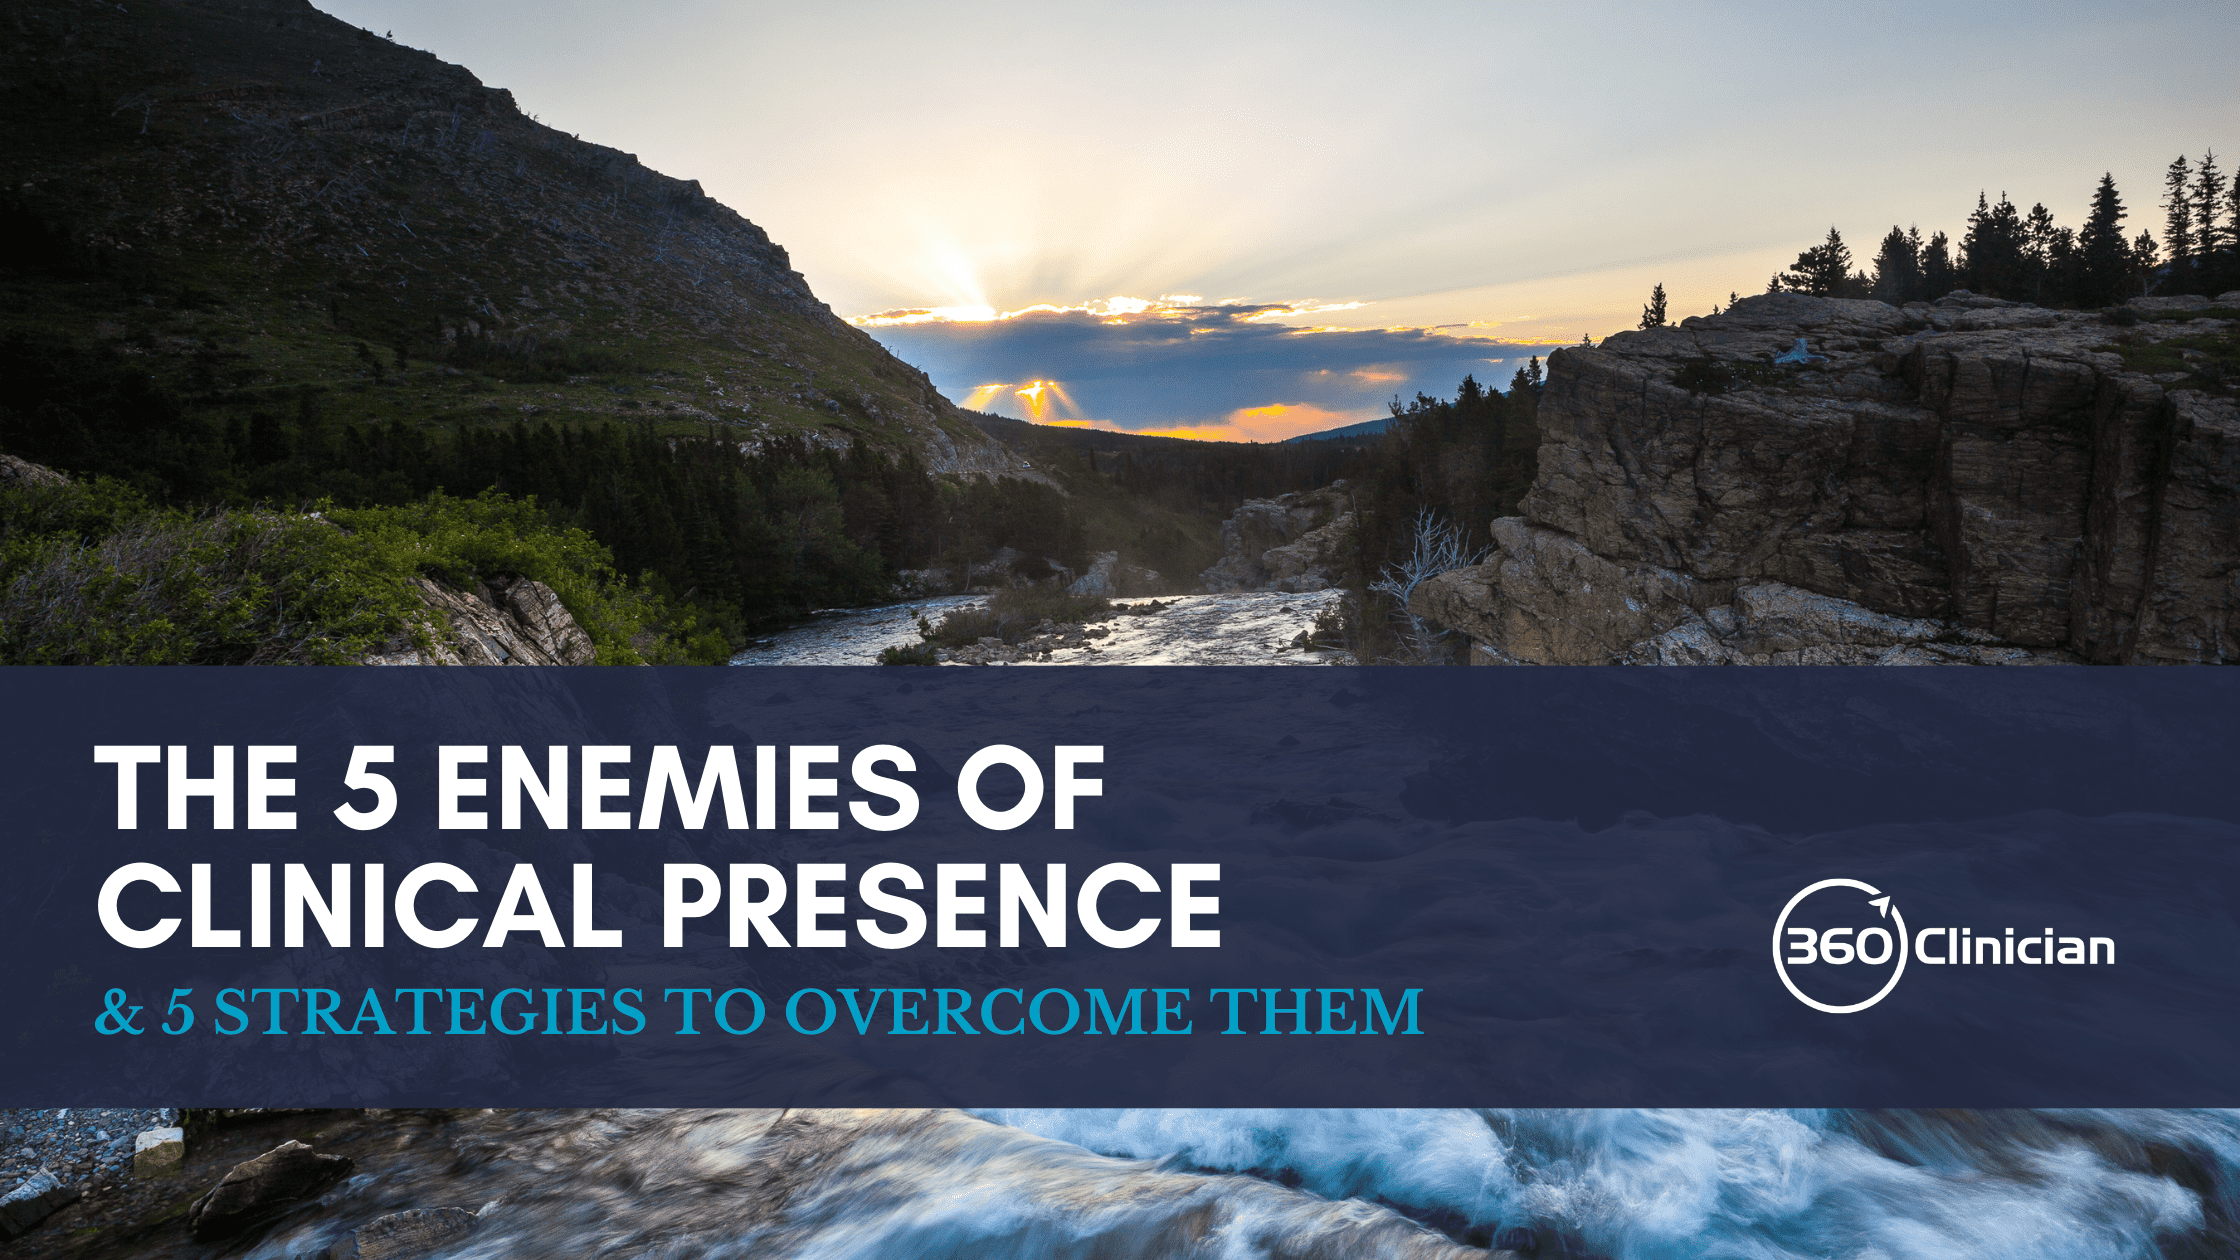 Read more about the 5 enemies of clinical presence